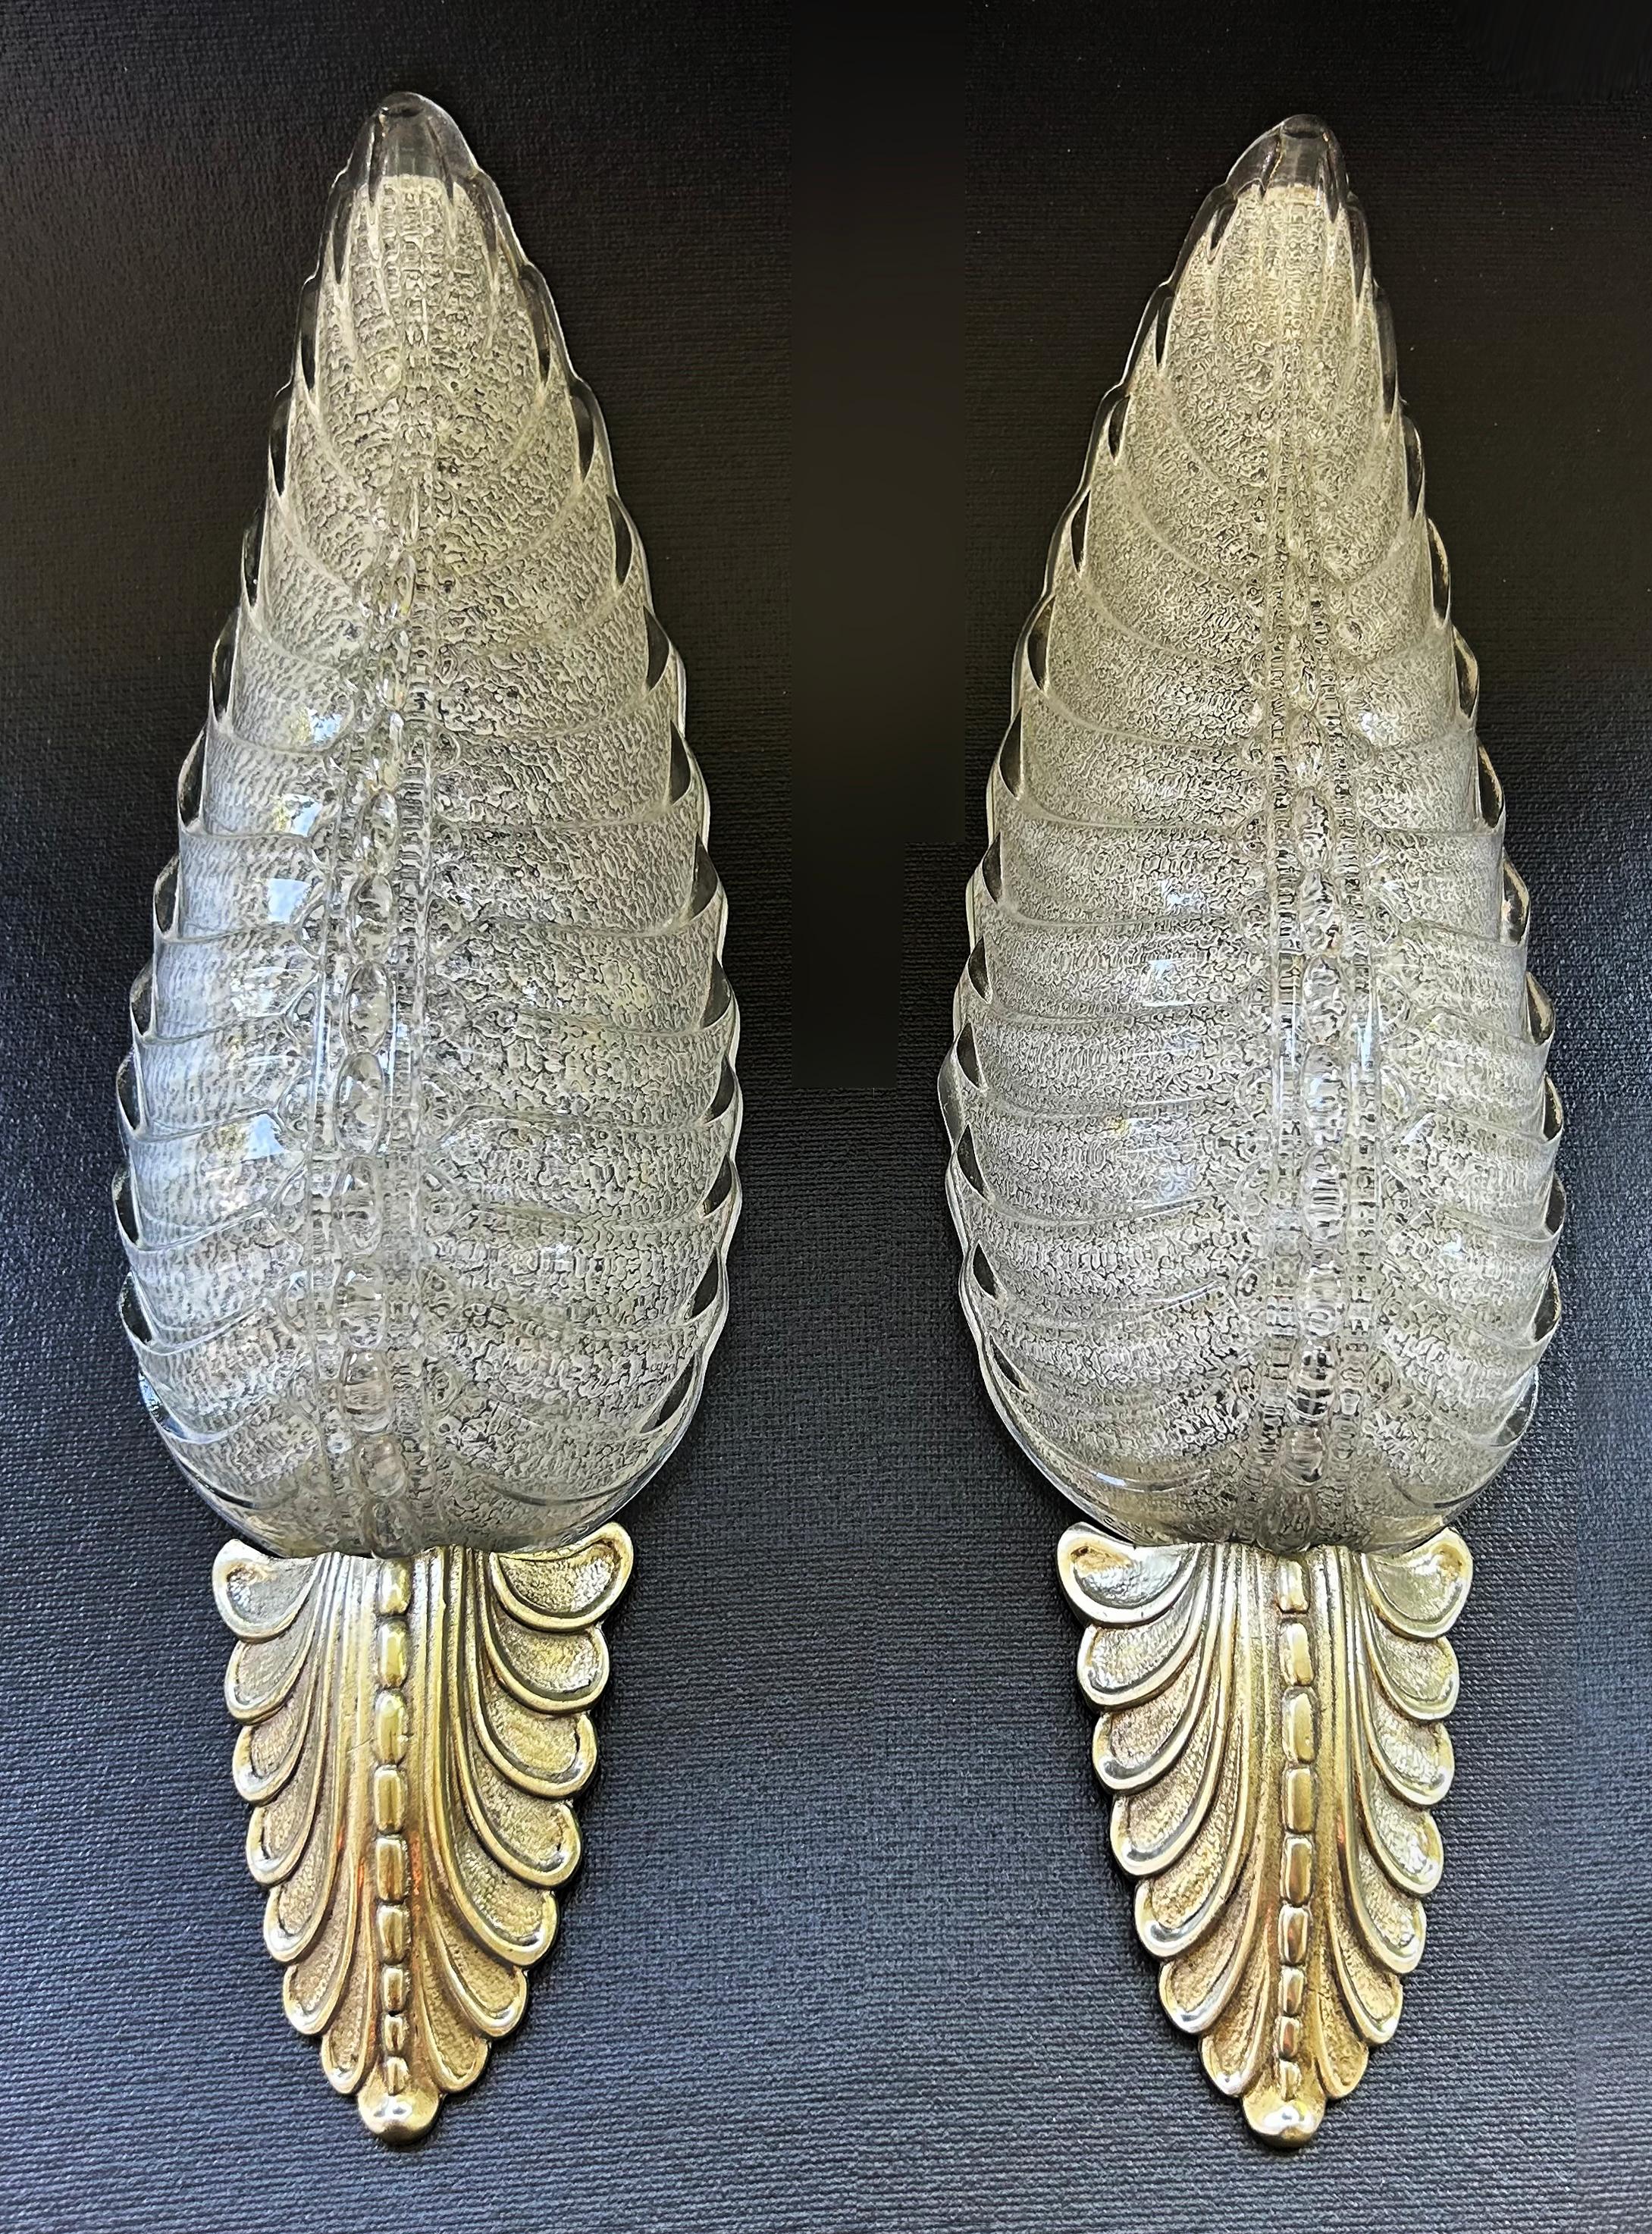  Barovier & Toso Bronze and Murano Glass Leaf Sconces with Gold Infusions

Offered for sale is a pair of Murano glass and bronze Italian Barovier & Toso leaf sconces.  The sconces are hard-wired for American electrical and are ready to hang.  They